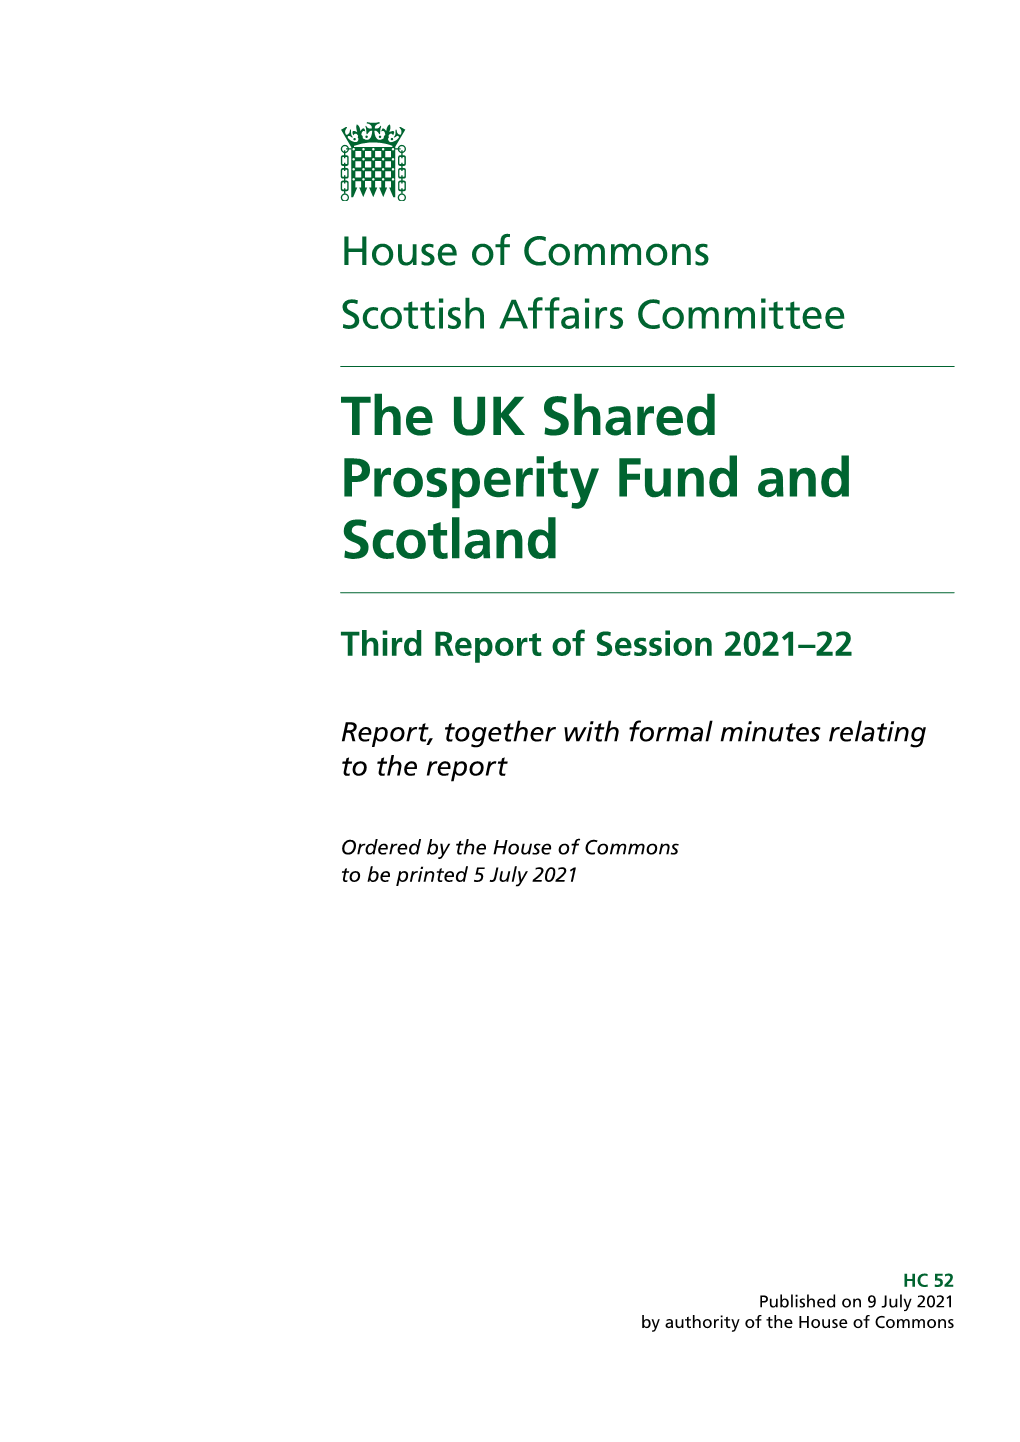 Scotland and the Shared Prosperity Fund